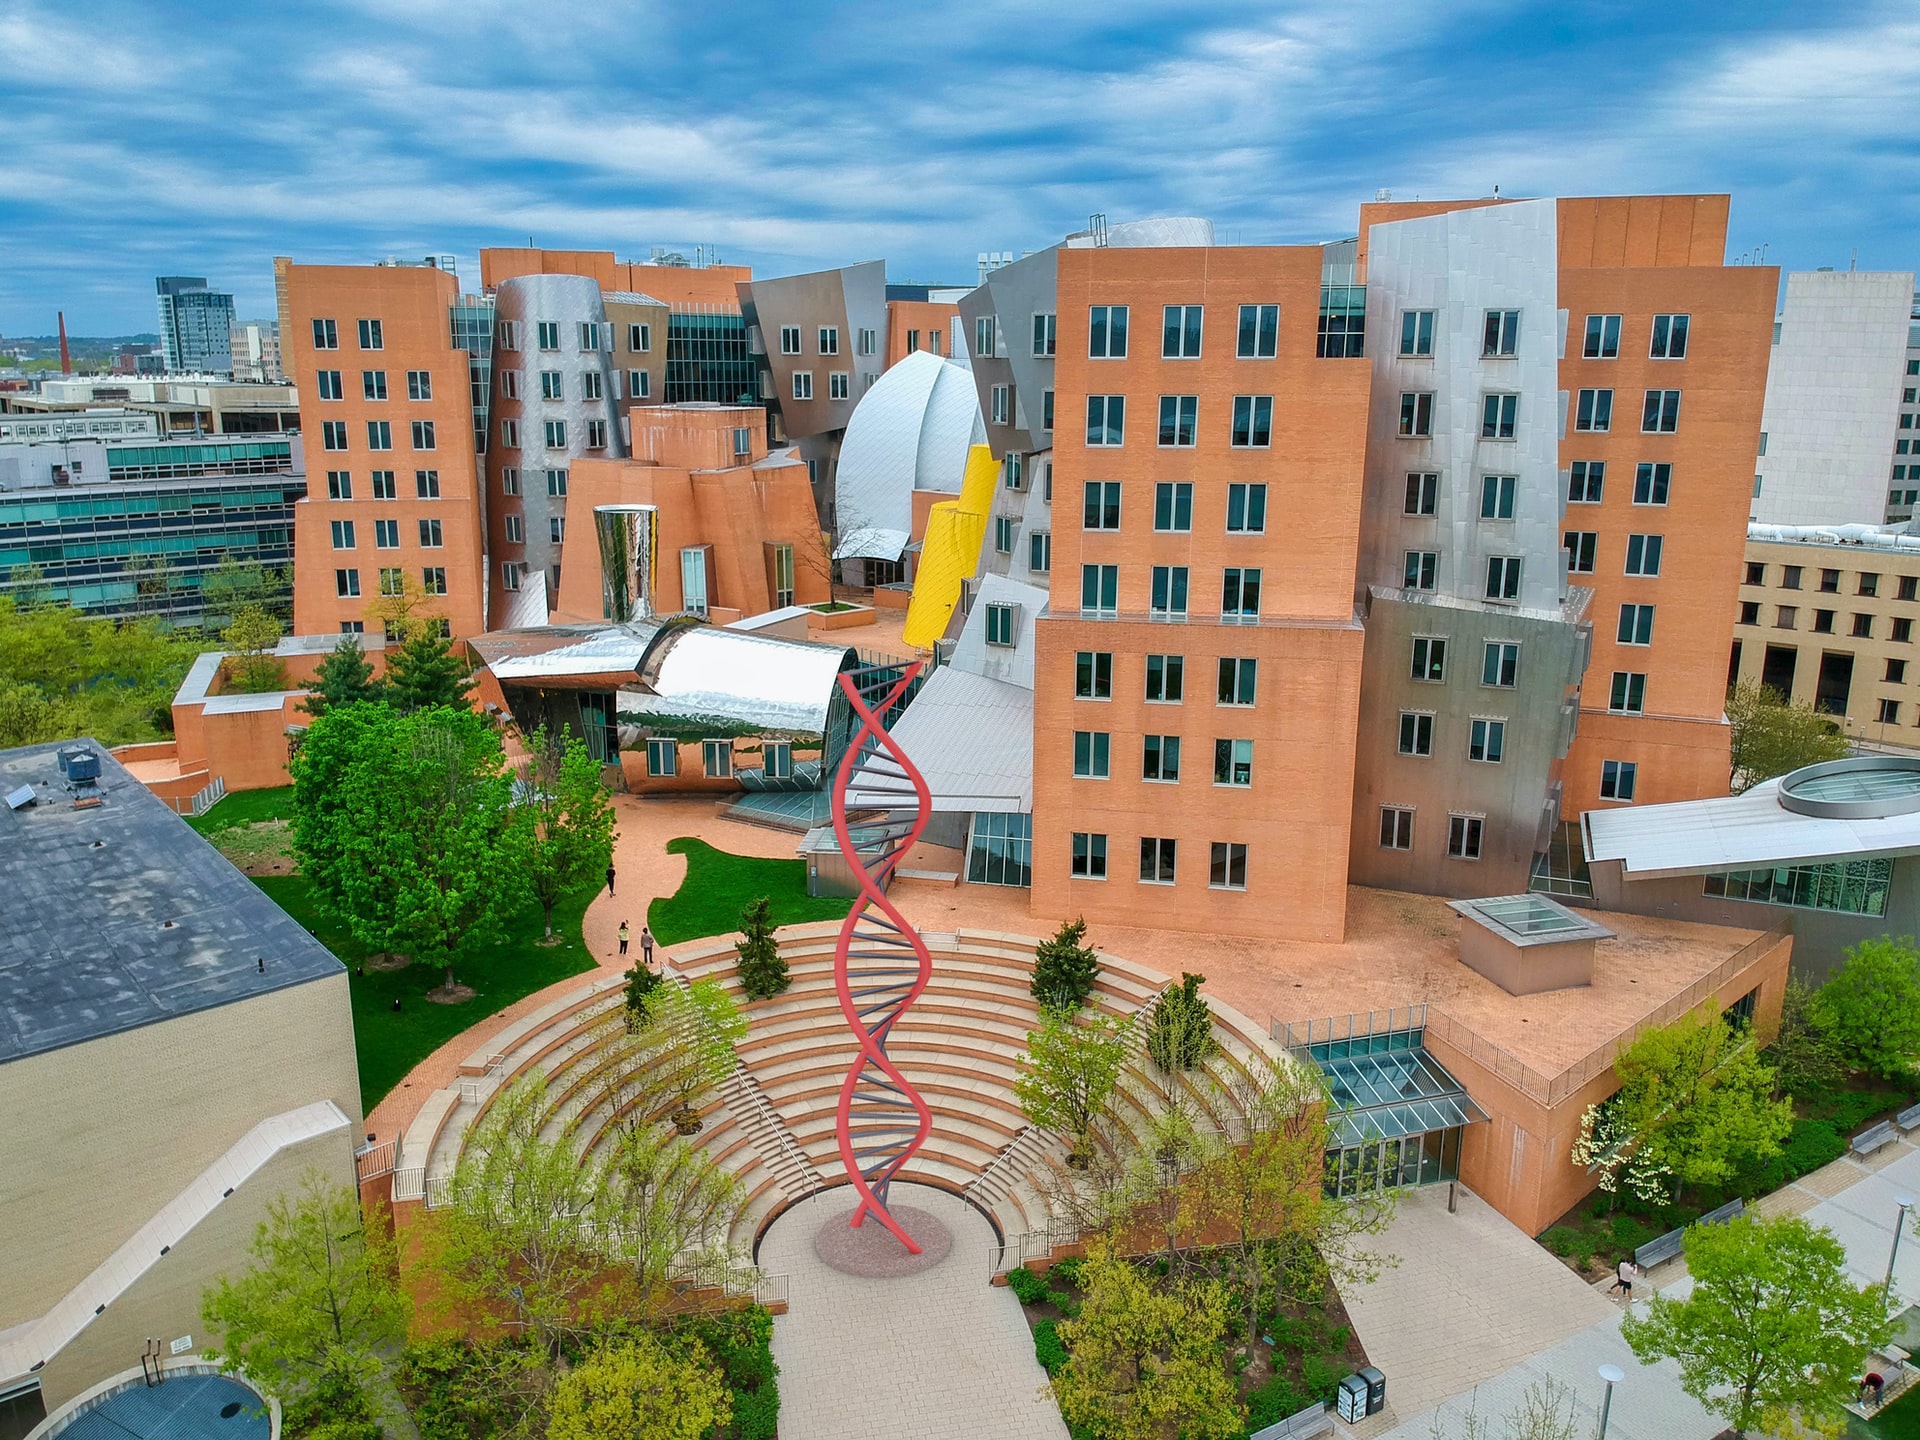 How To Get Into MIT - Massachusetts Institute of Technology